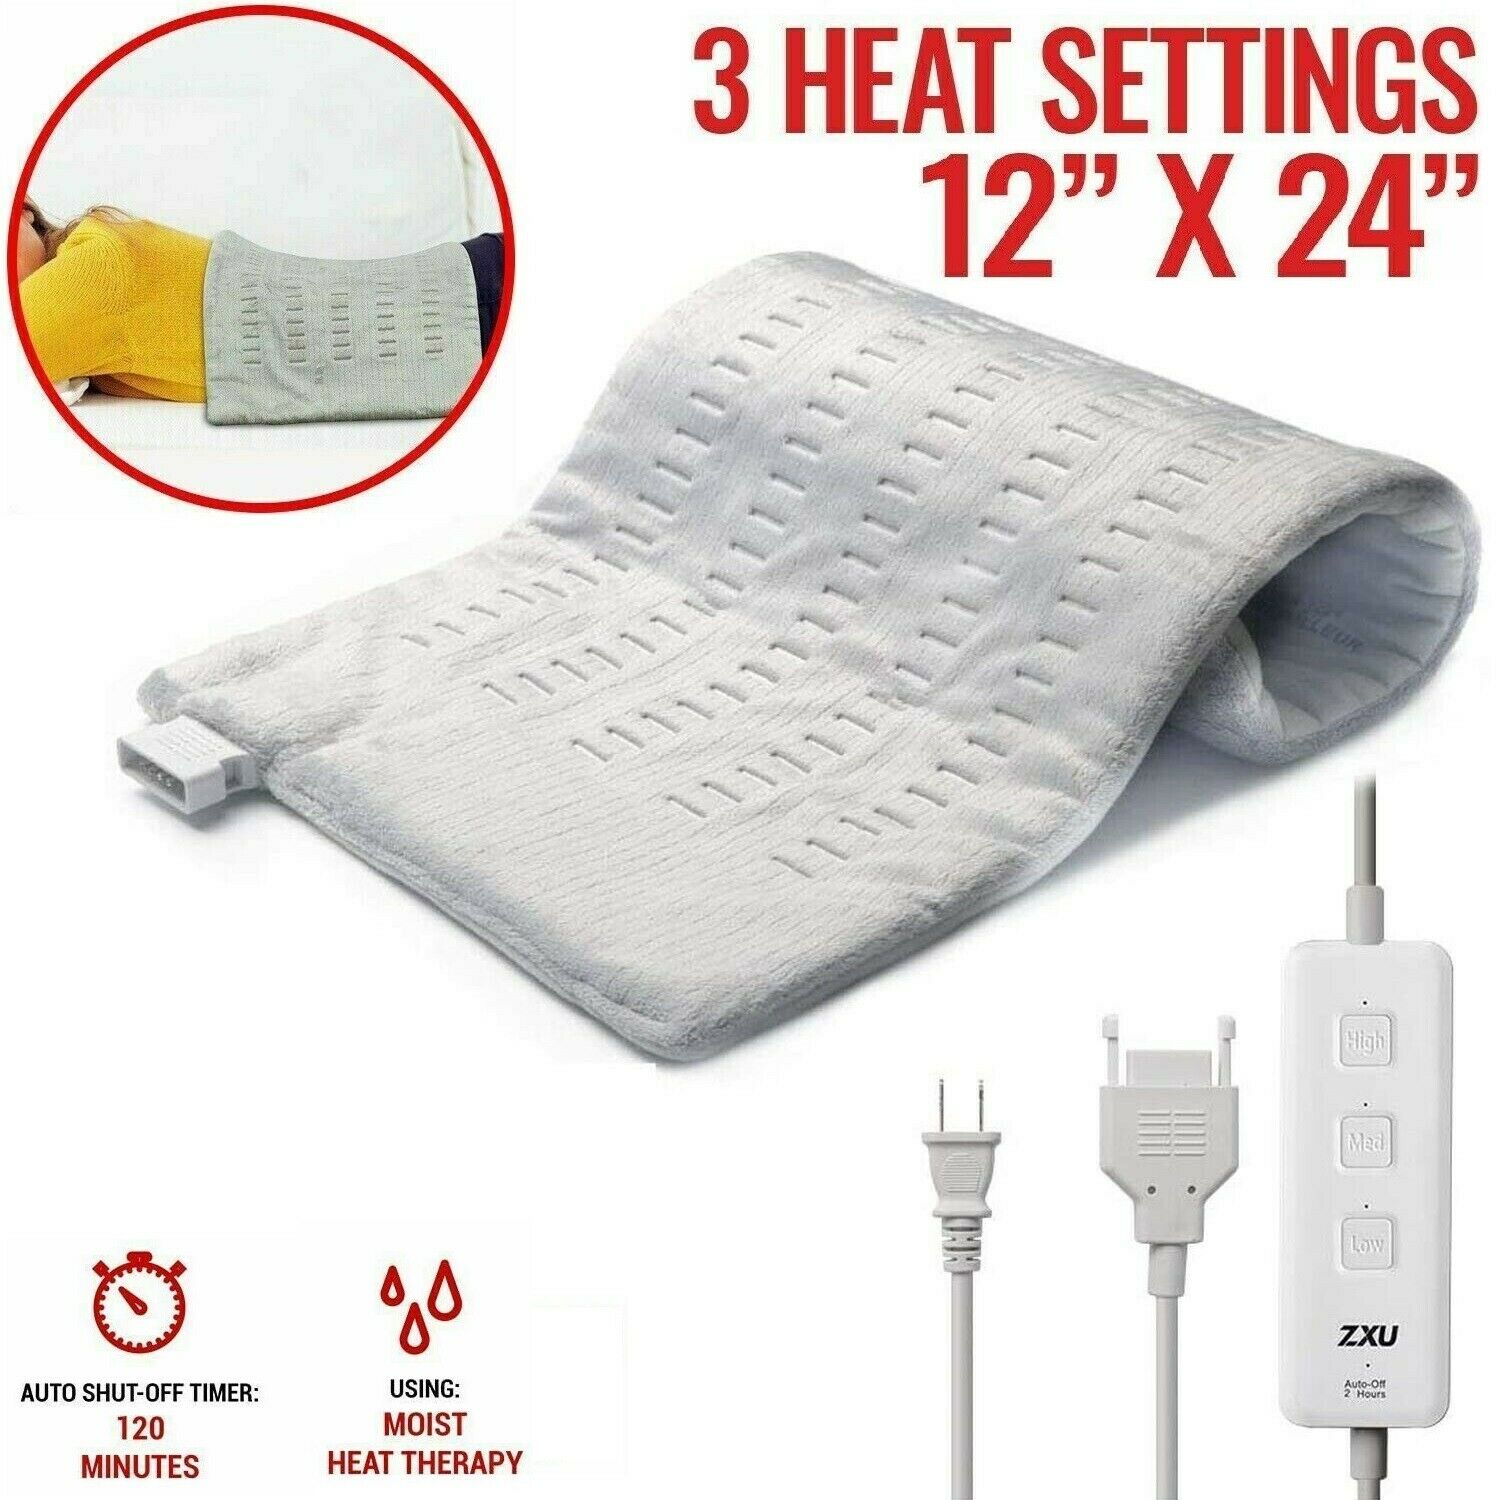 Electric Heating Pad For Shoulder Neck Back Spine Legs Feet Pain Moist Thermal